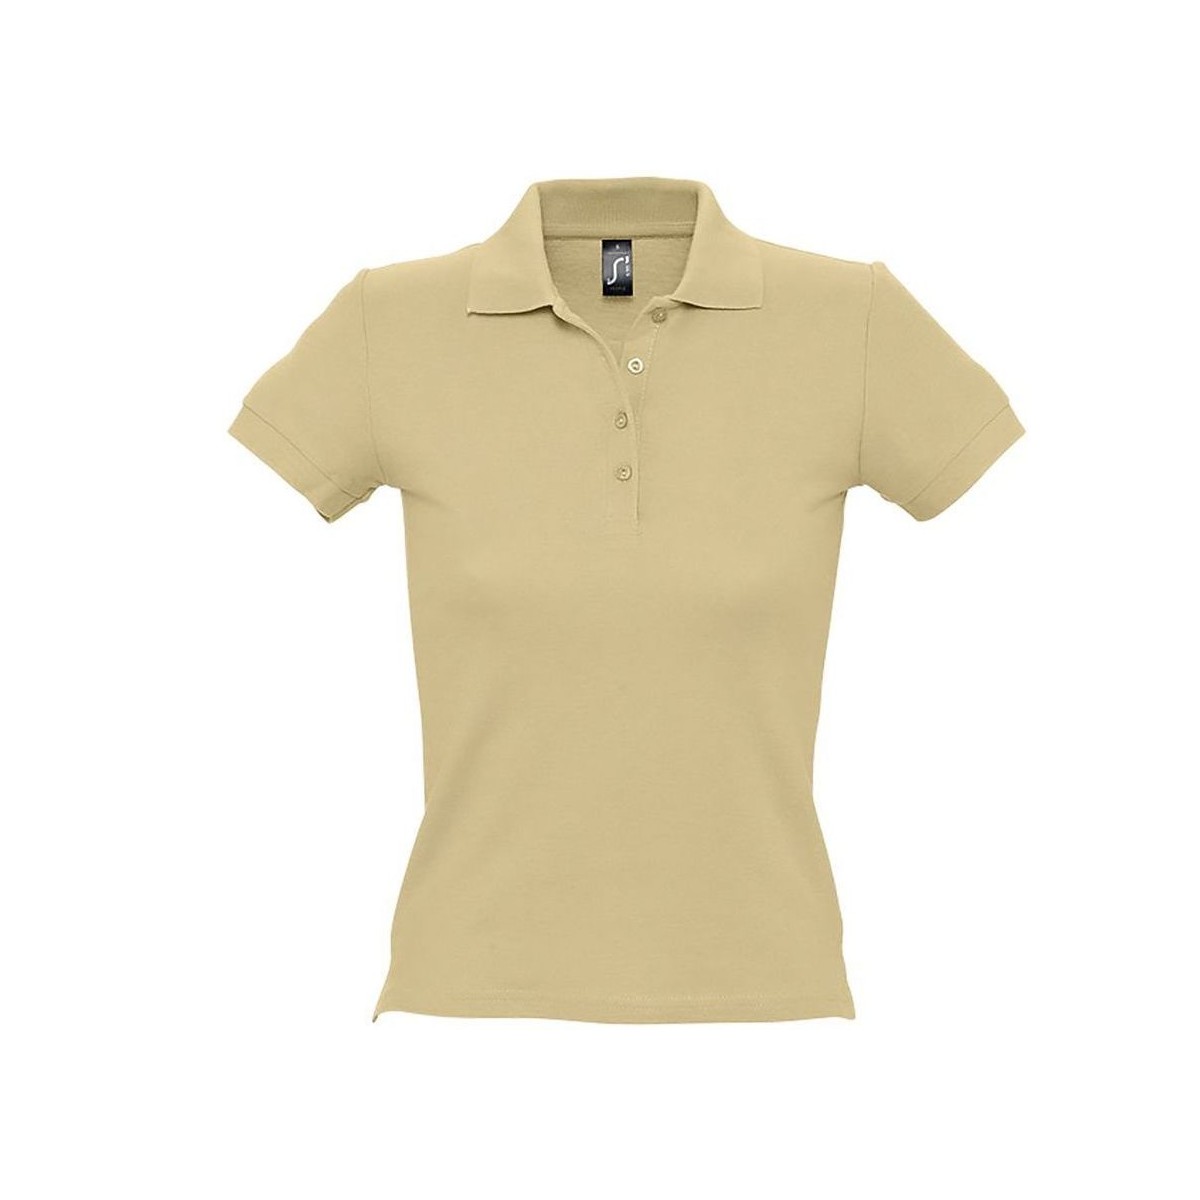 Textil Mulher Polos mangas curta Sols PEOPLE - POLO MUJER Bege